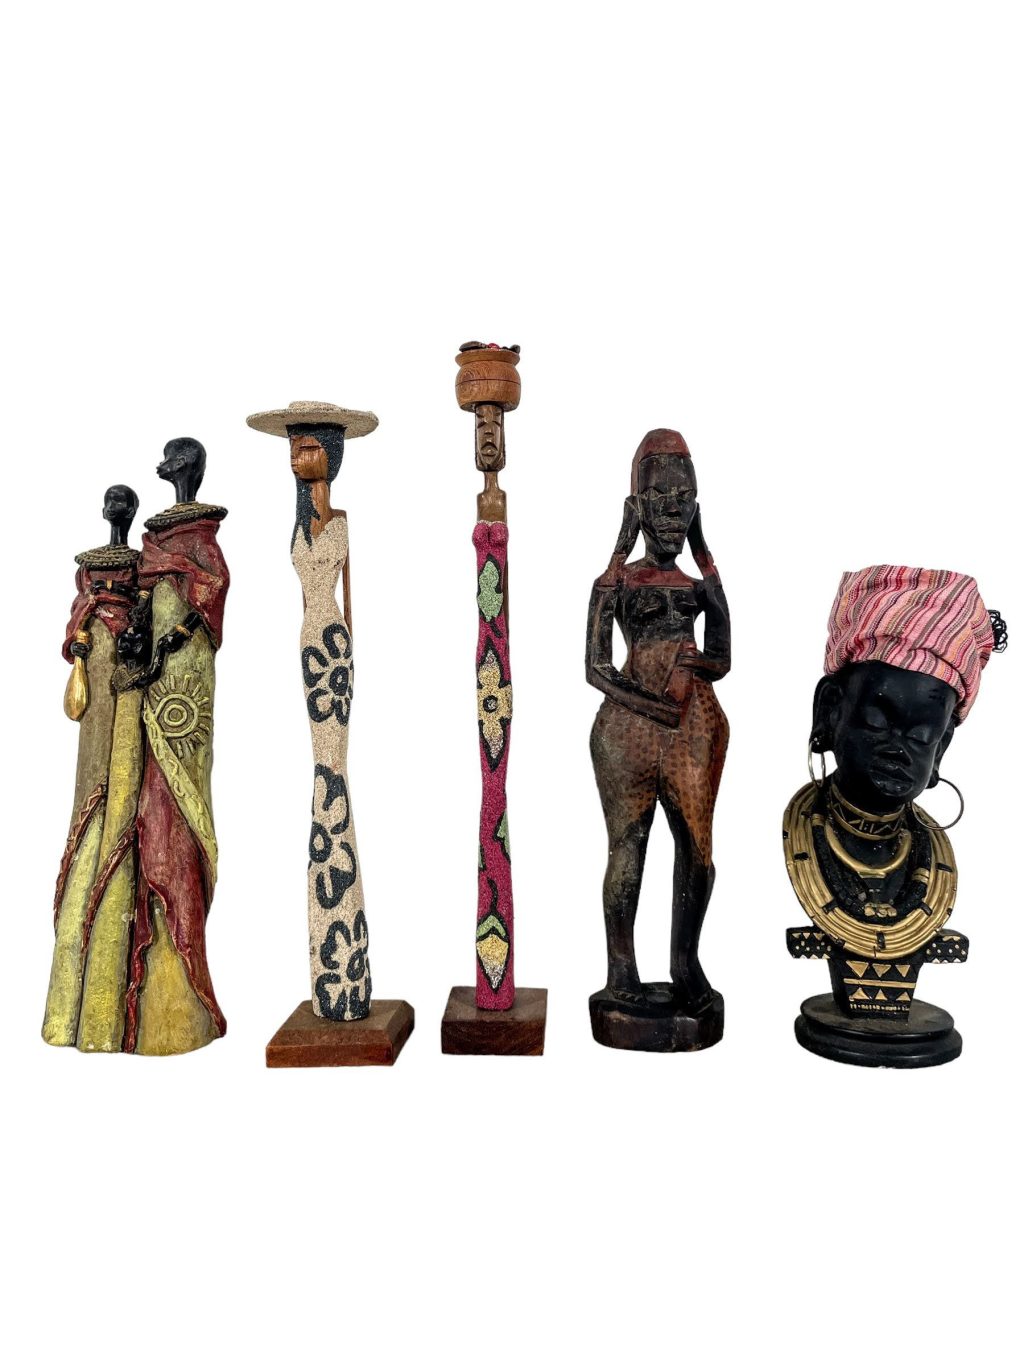 Vintage African Job Lot Collection Pieces Wooden Wood Resin Ornament Decorative Decor DIsplay Tribal Prop Wall Hanging c1980-90’s / EVE